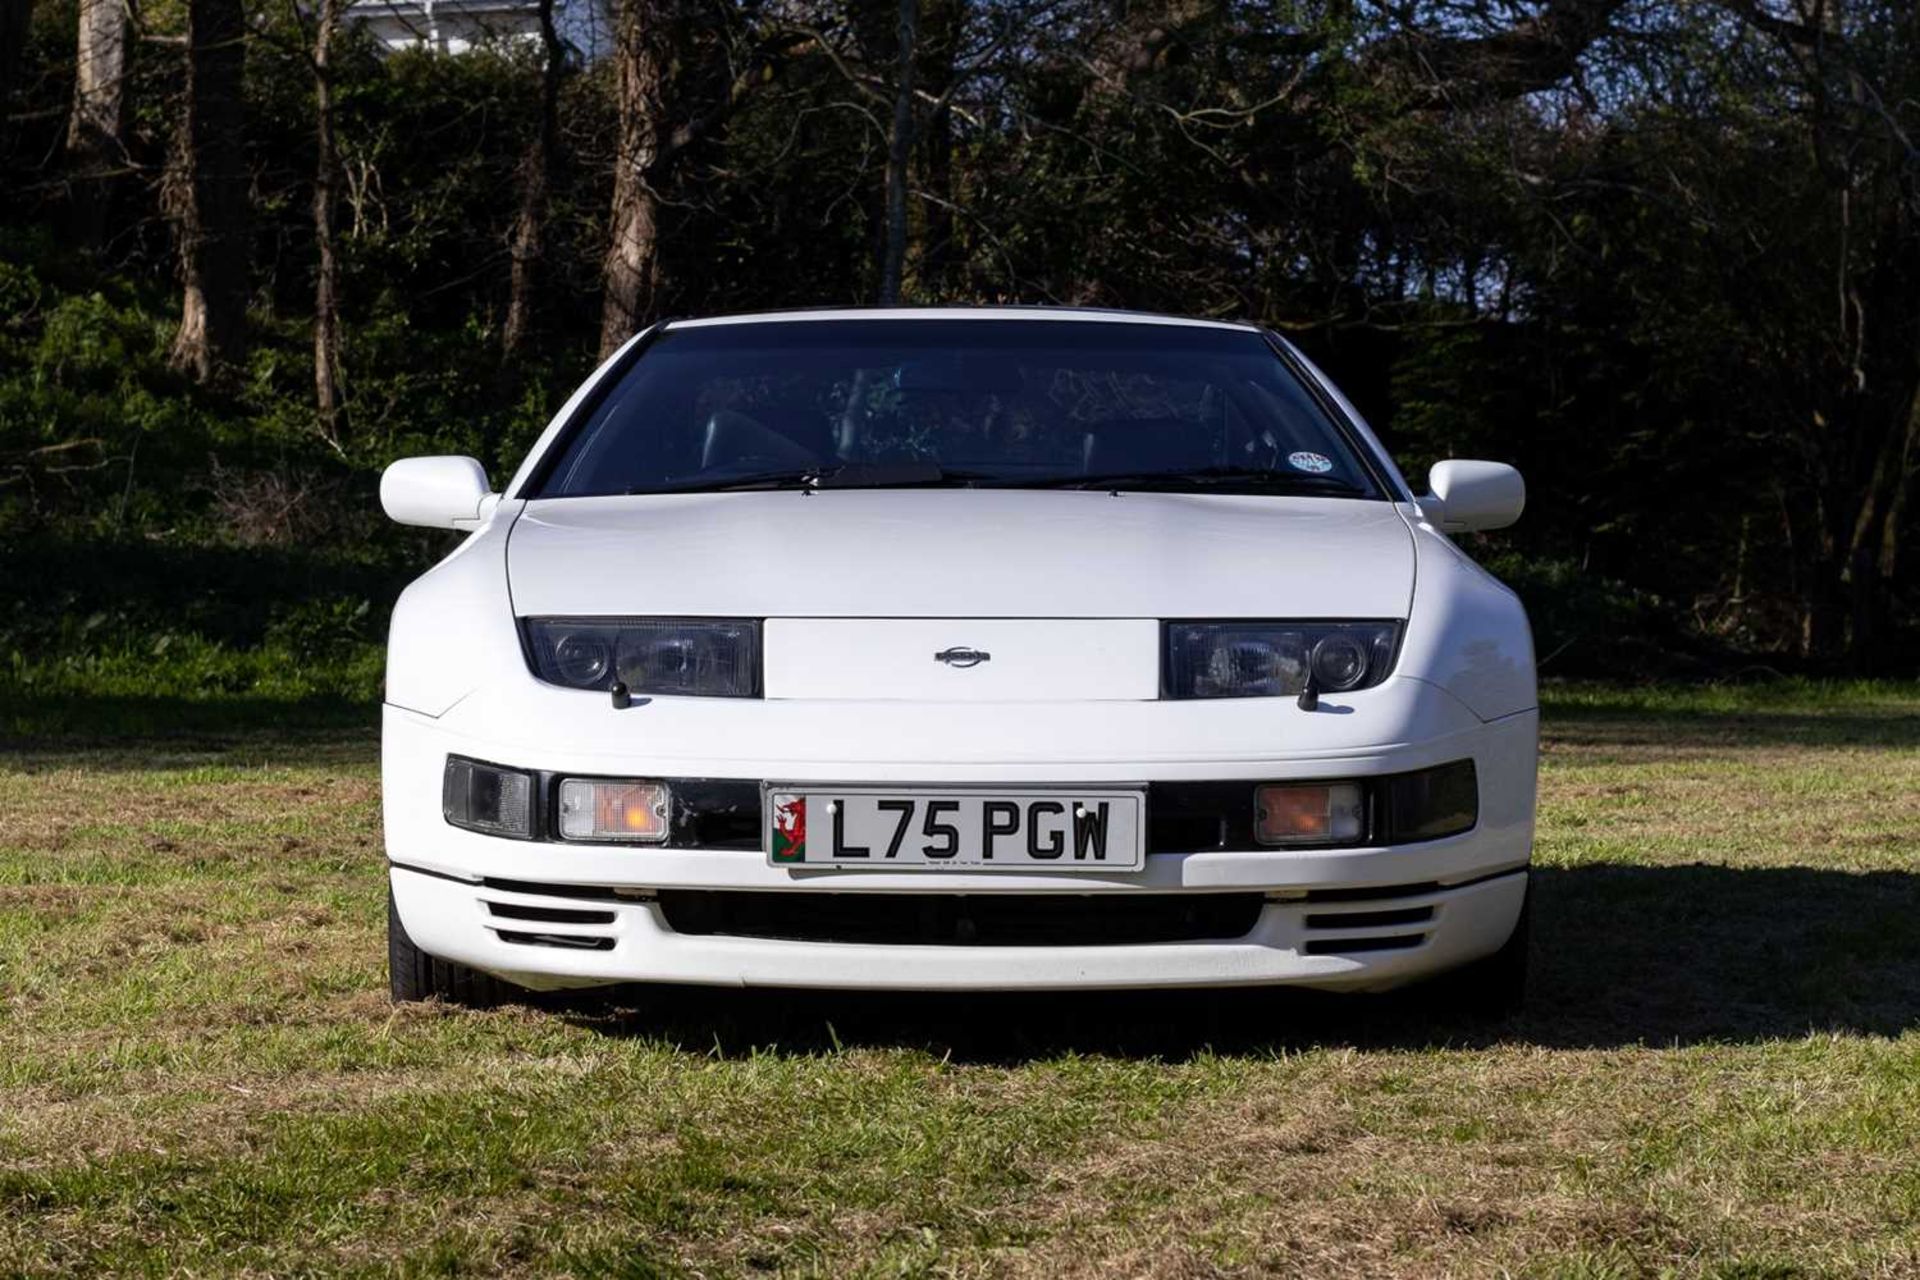 1990 Nissan 300ZX Turbo 2+2 Targa One of the last examples registered in the UK - Image 37 of 89